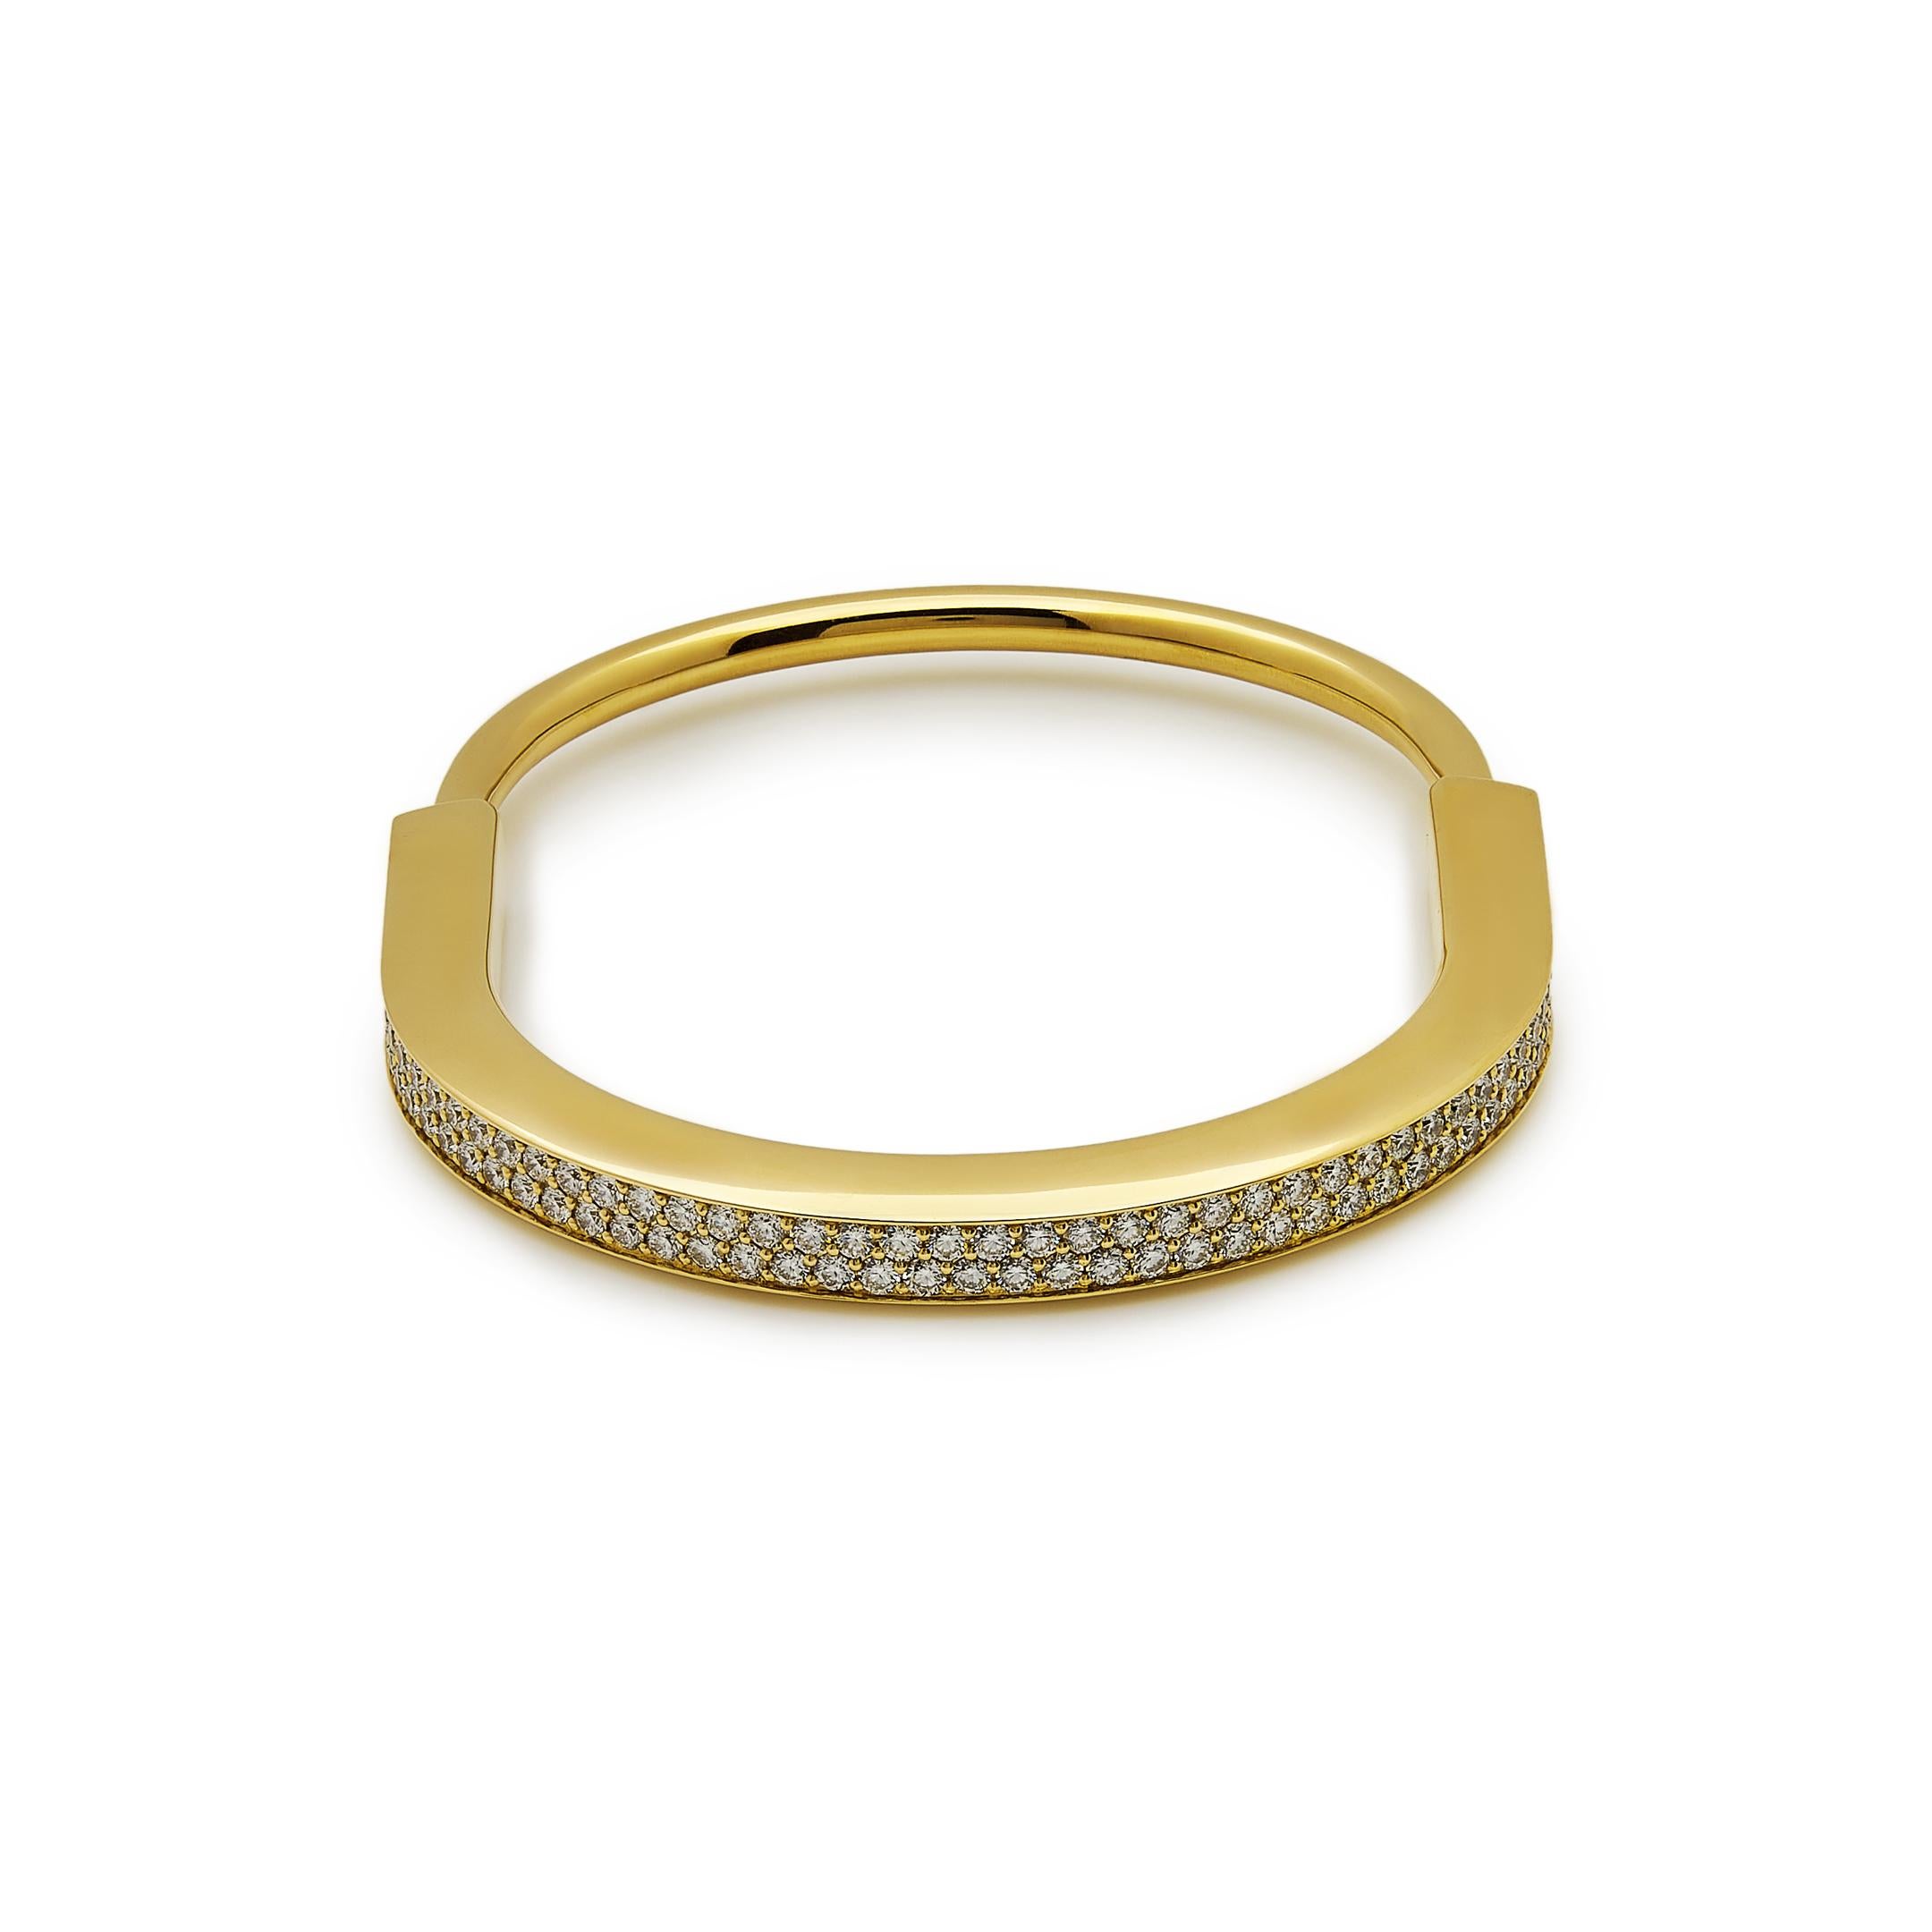 Tiffany & Co. Lock Bangle in Yellow Gold with Full Pavé Diamonds 70158264 For Sale 1